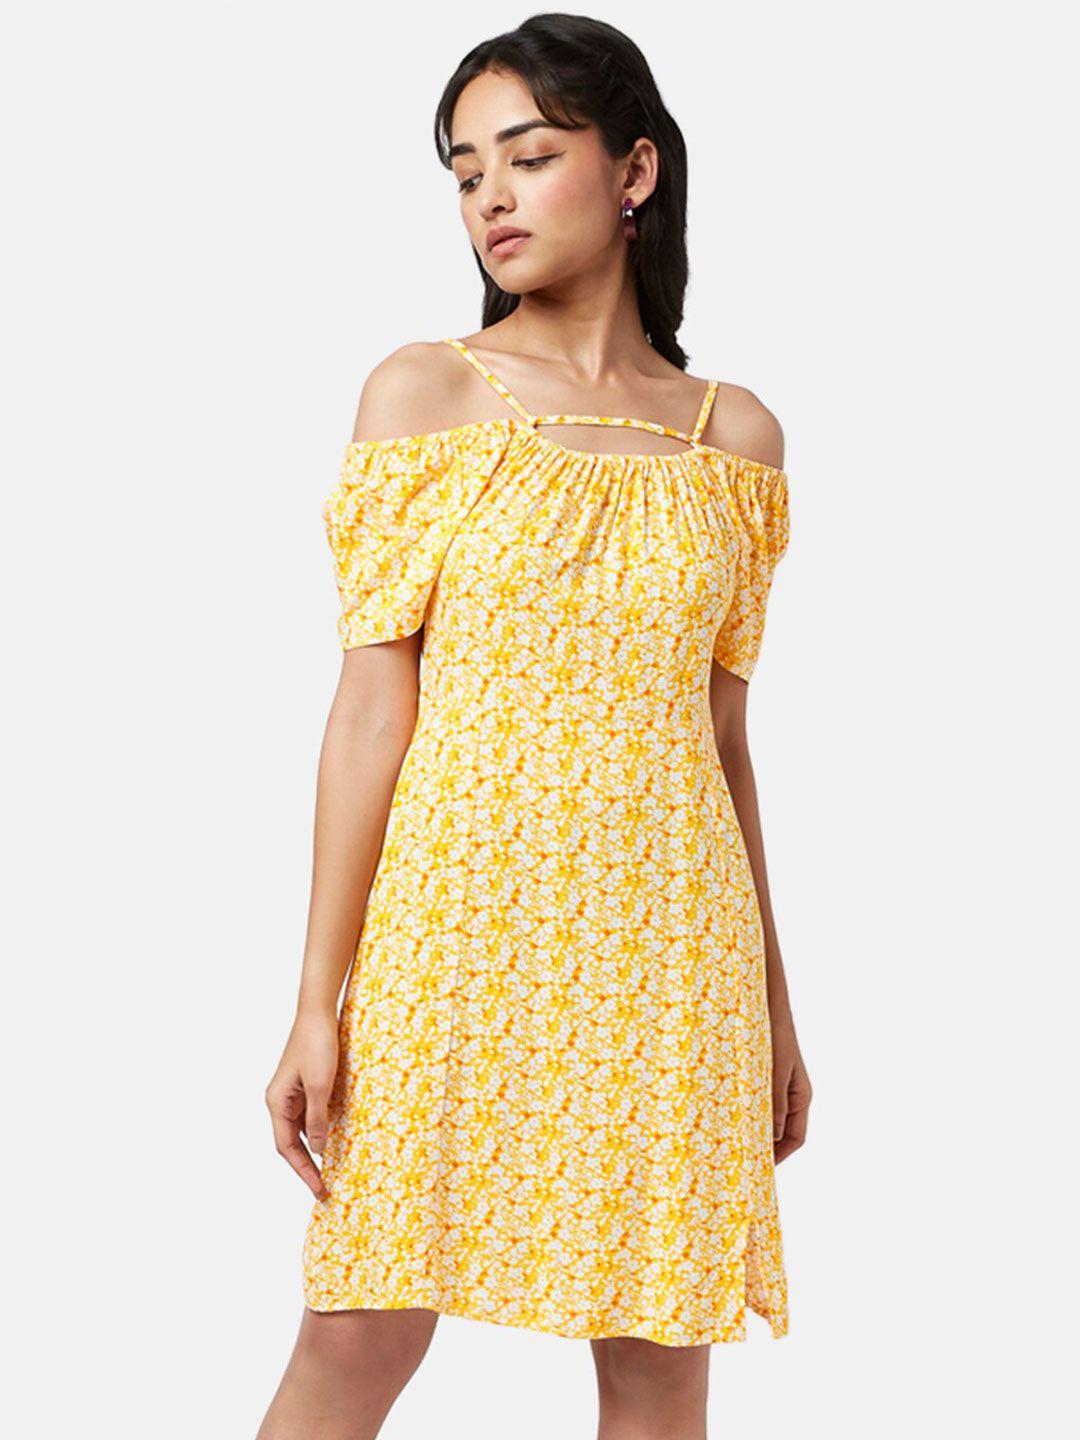 yu by pantaloons yellow floral ethnic a-line dress